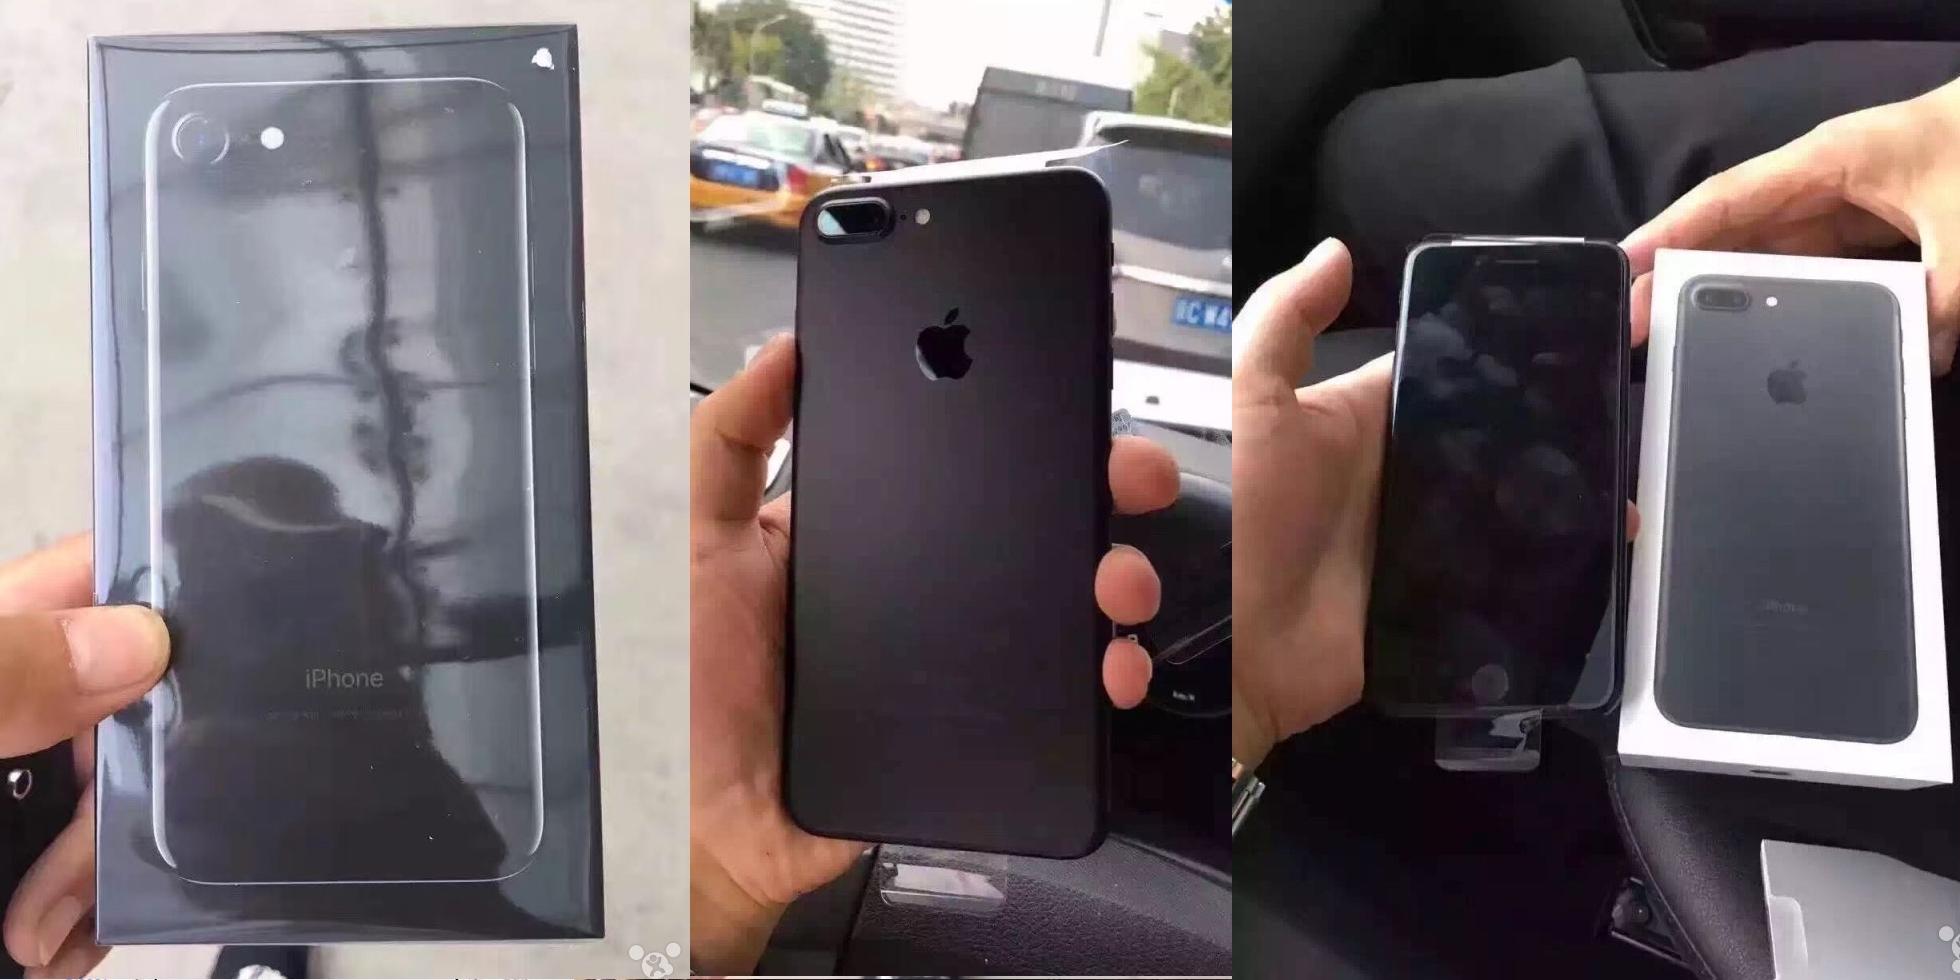 Opwekking Componist een experiment doen Black and Jet Black iPhone 7 models get first unboxing in the wild ahead of  official launch [Gallery] - 9to5Mac